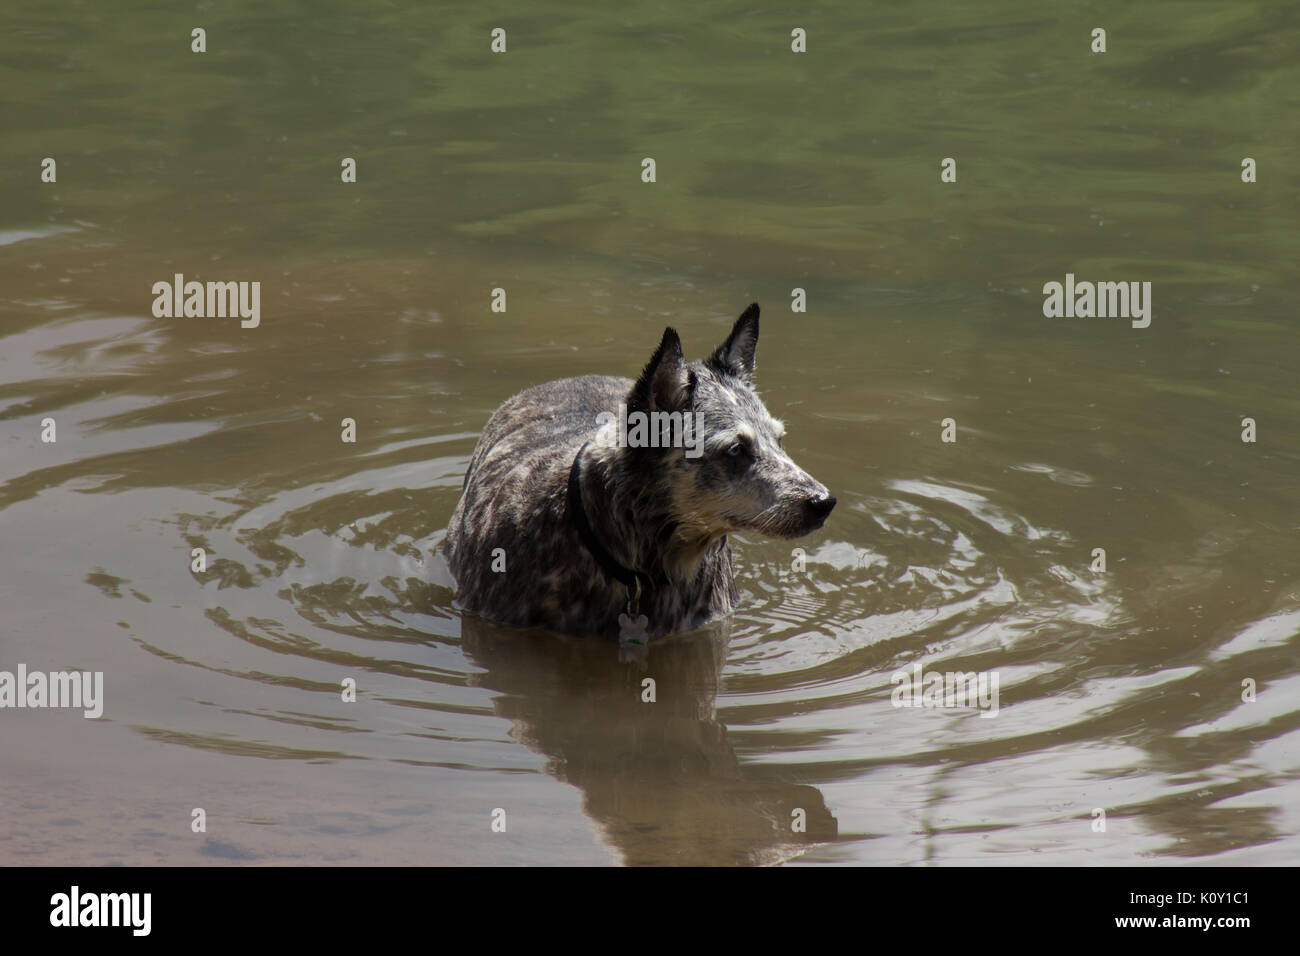 Grey dog (Canis lupus familiaris) cooling down in a lake during the California drought Stock Photo